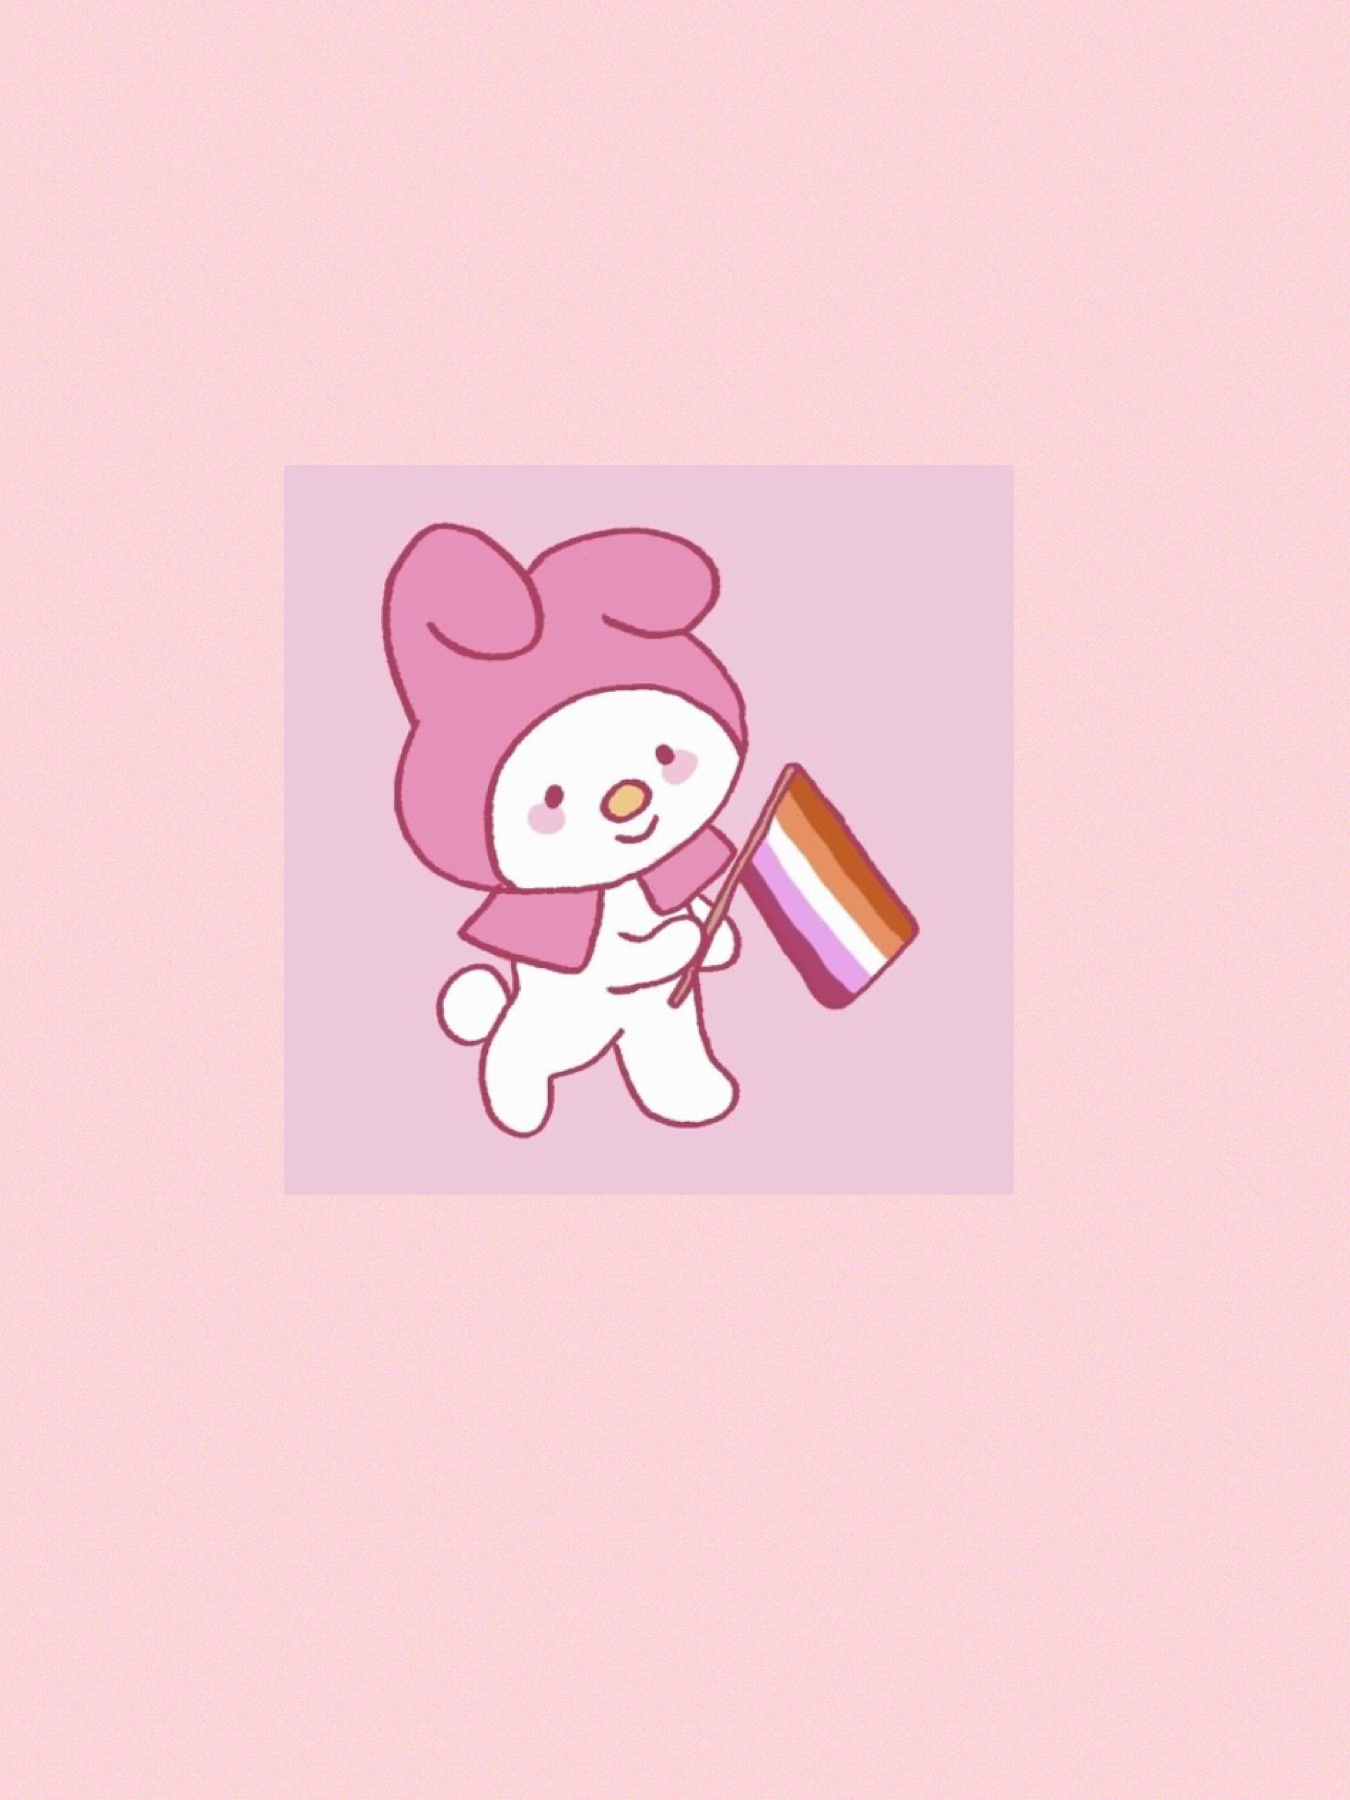 Sanrio Pride Wallpapers Day Four!